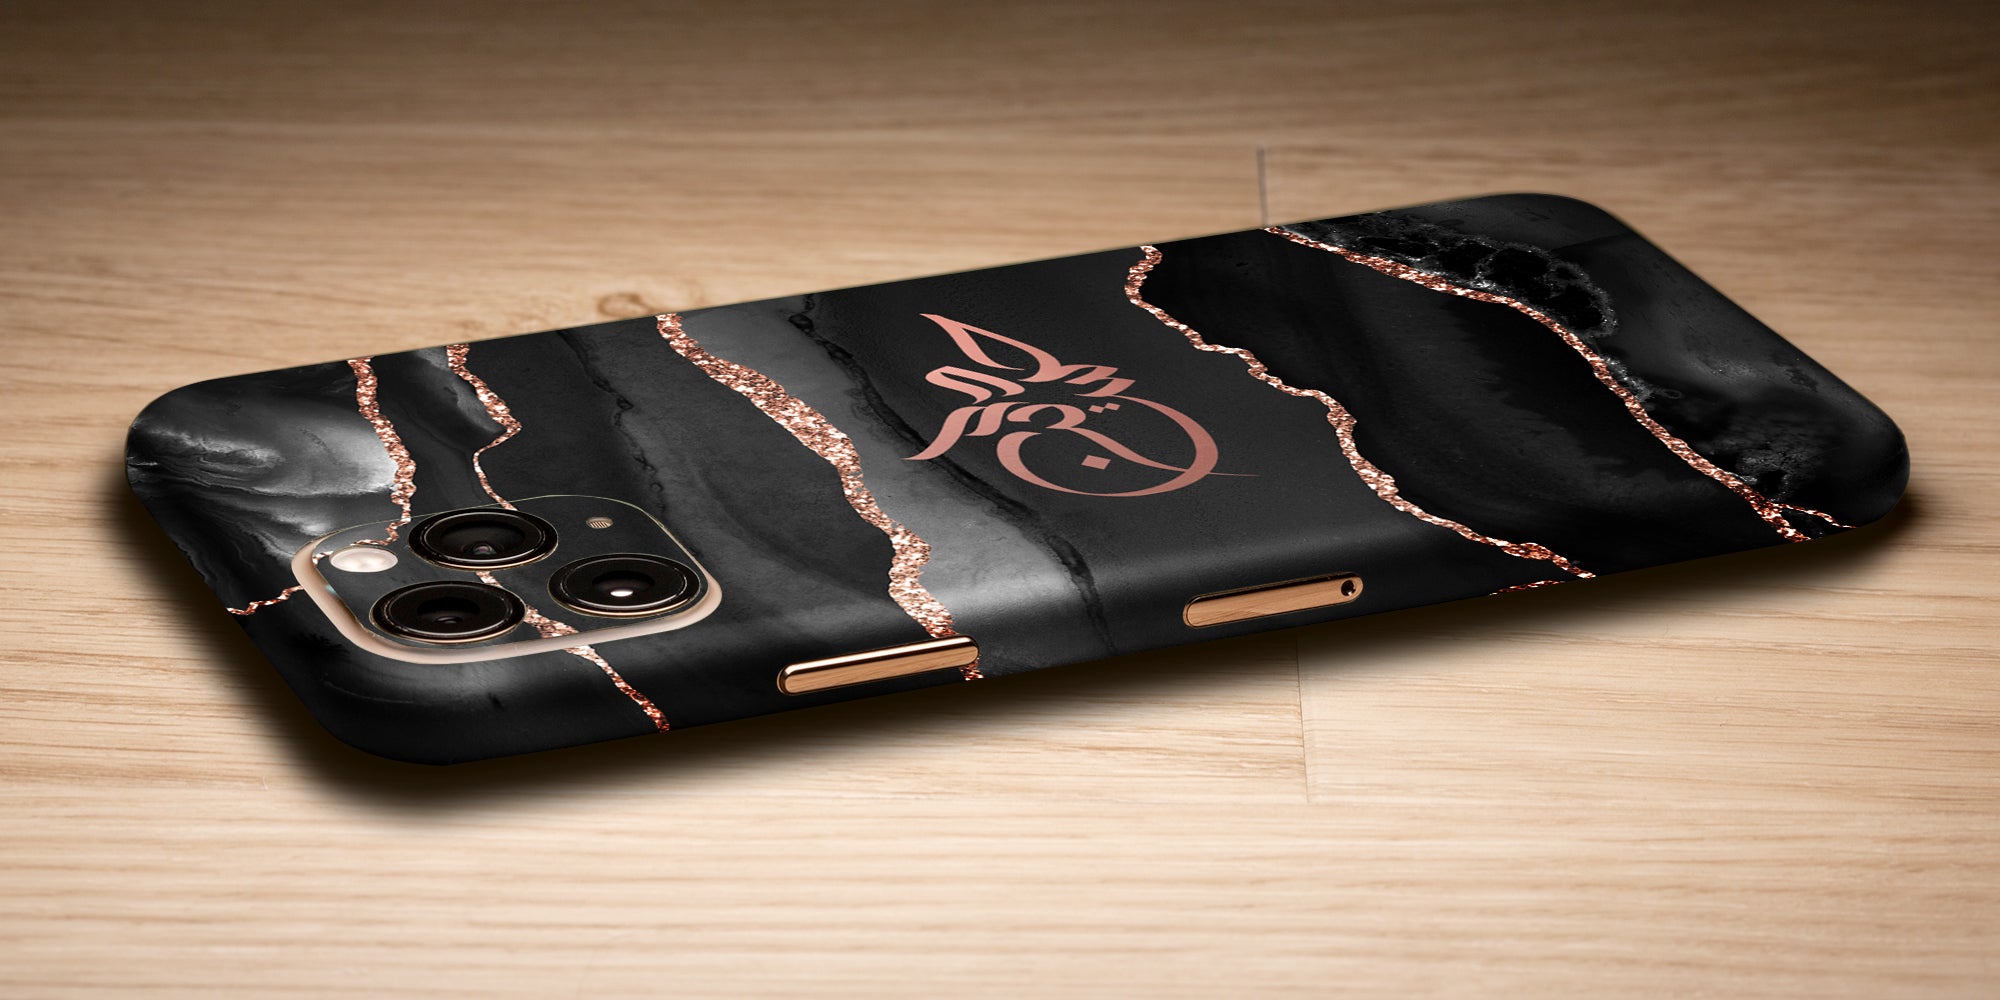 Agate Design Decal Skin With Personalised Arabic Name Phone Wrap - Black and Rose Gold